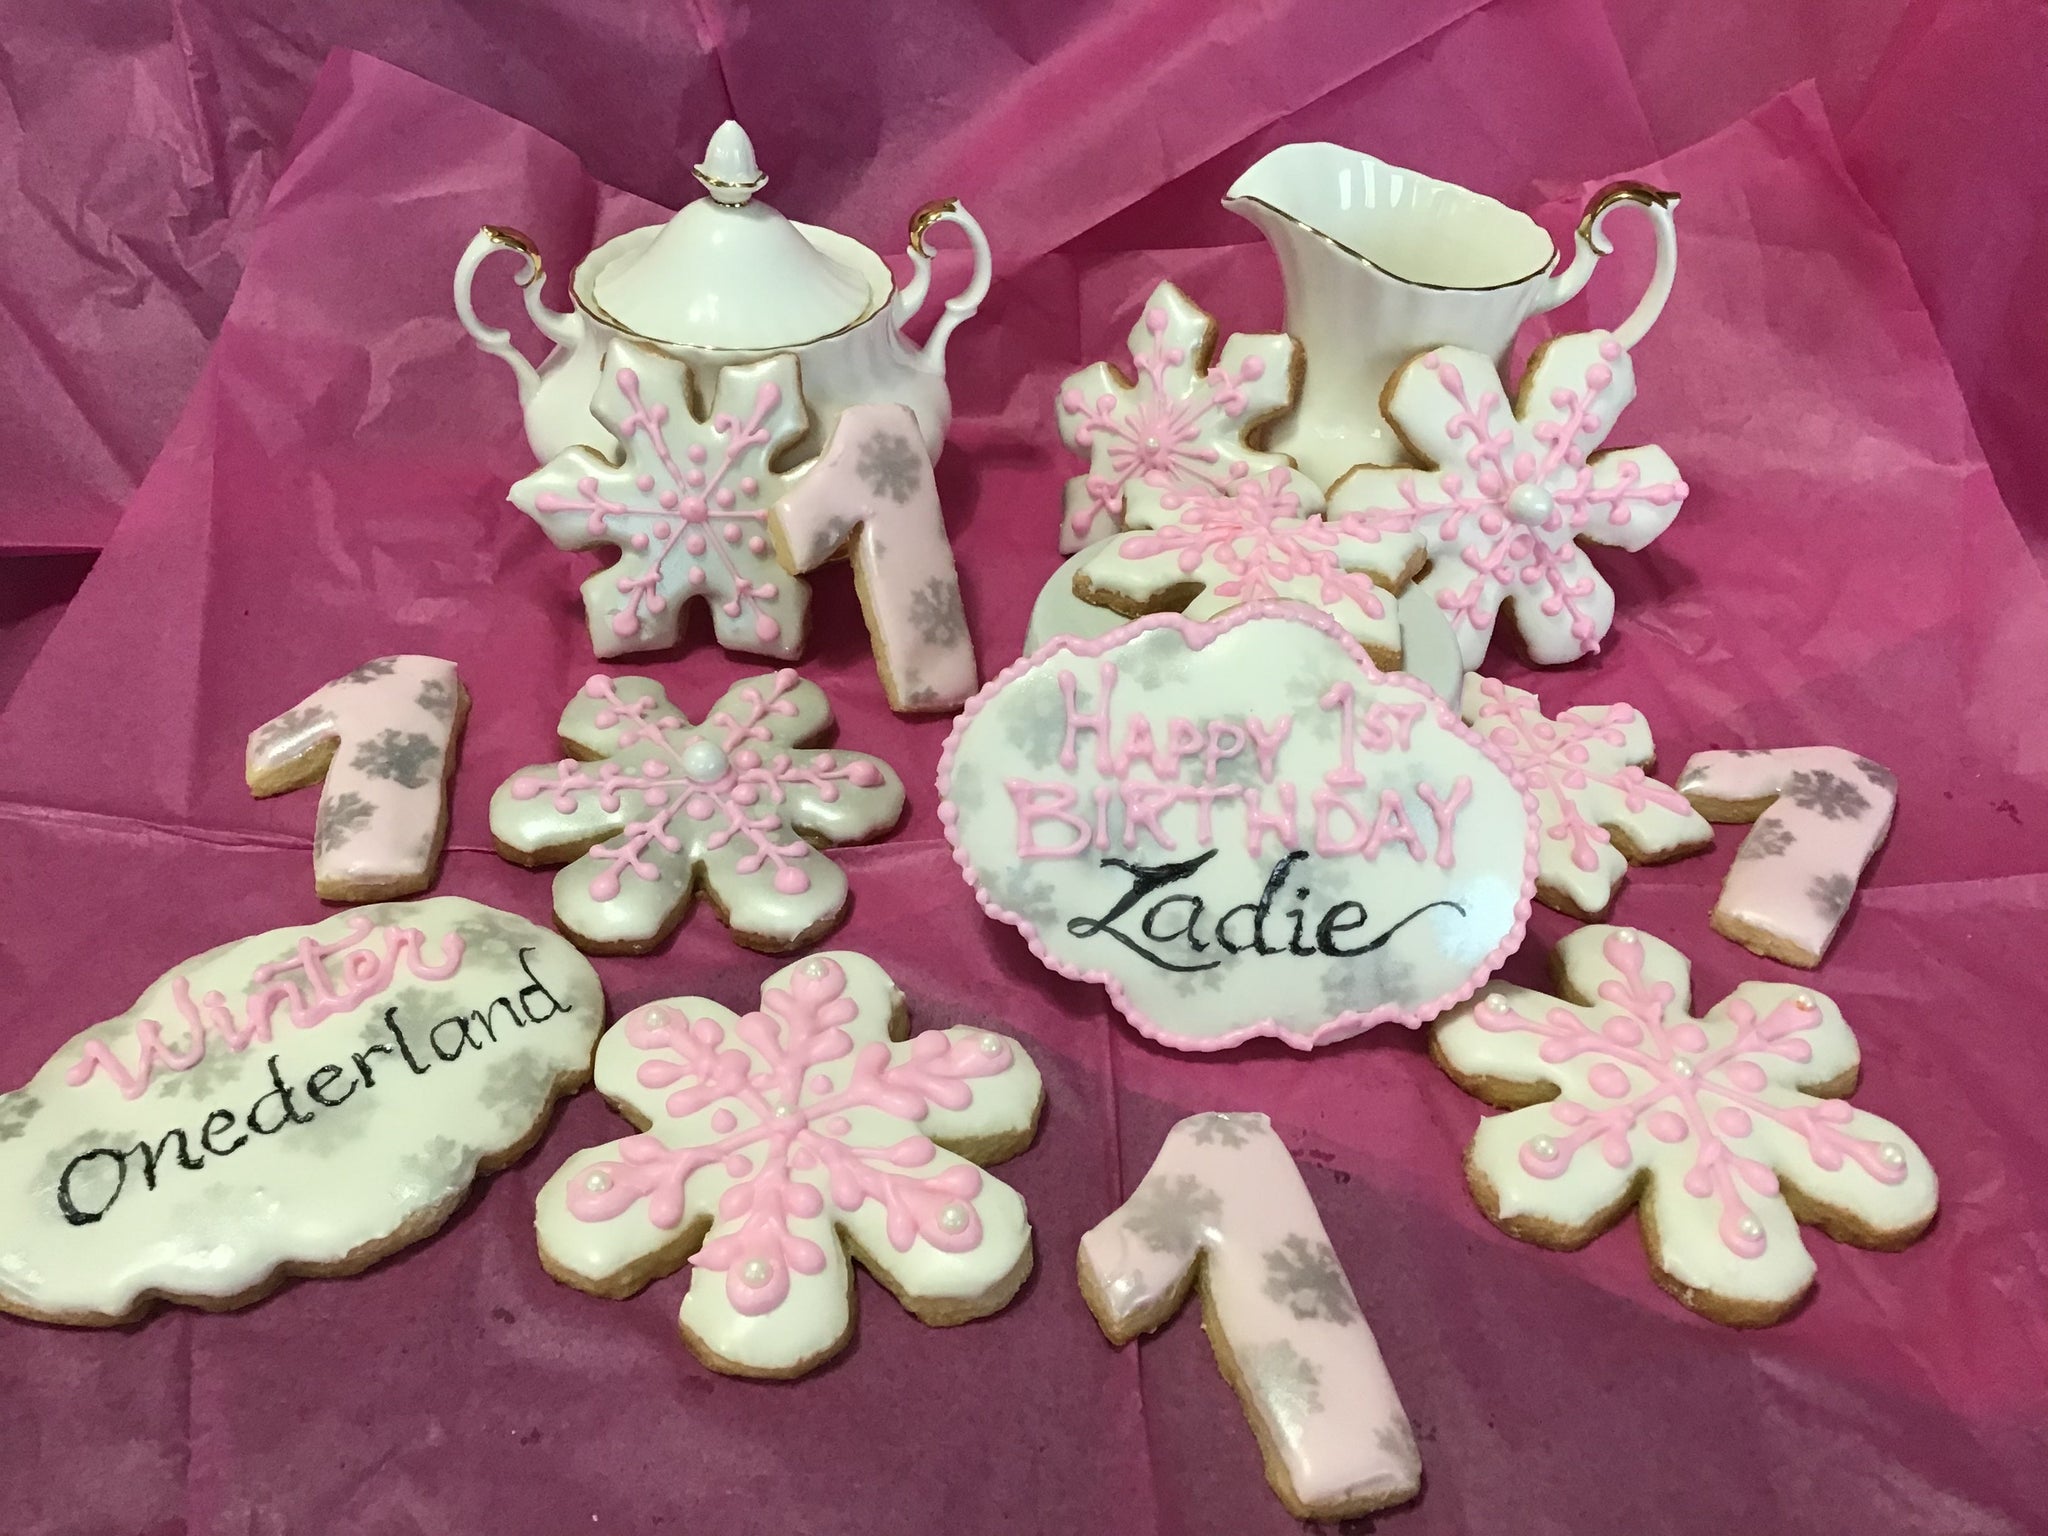 Snowglobe Cookies With Royal Icing Make Great Winter Party Favors! -  creative jewish mom